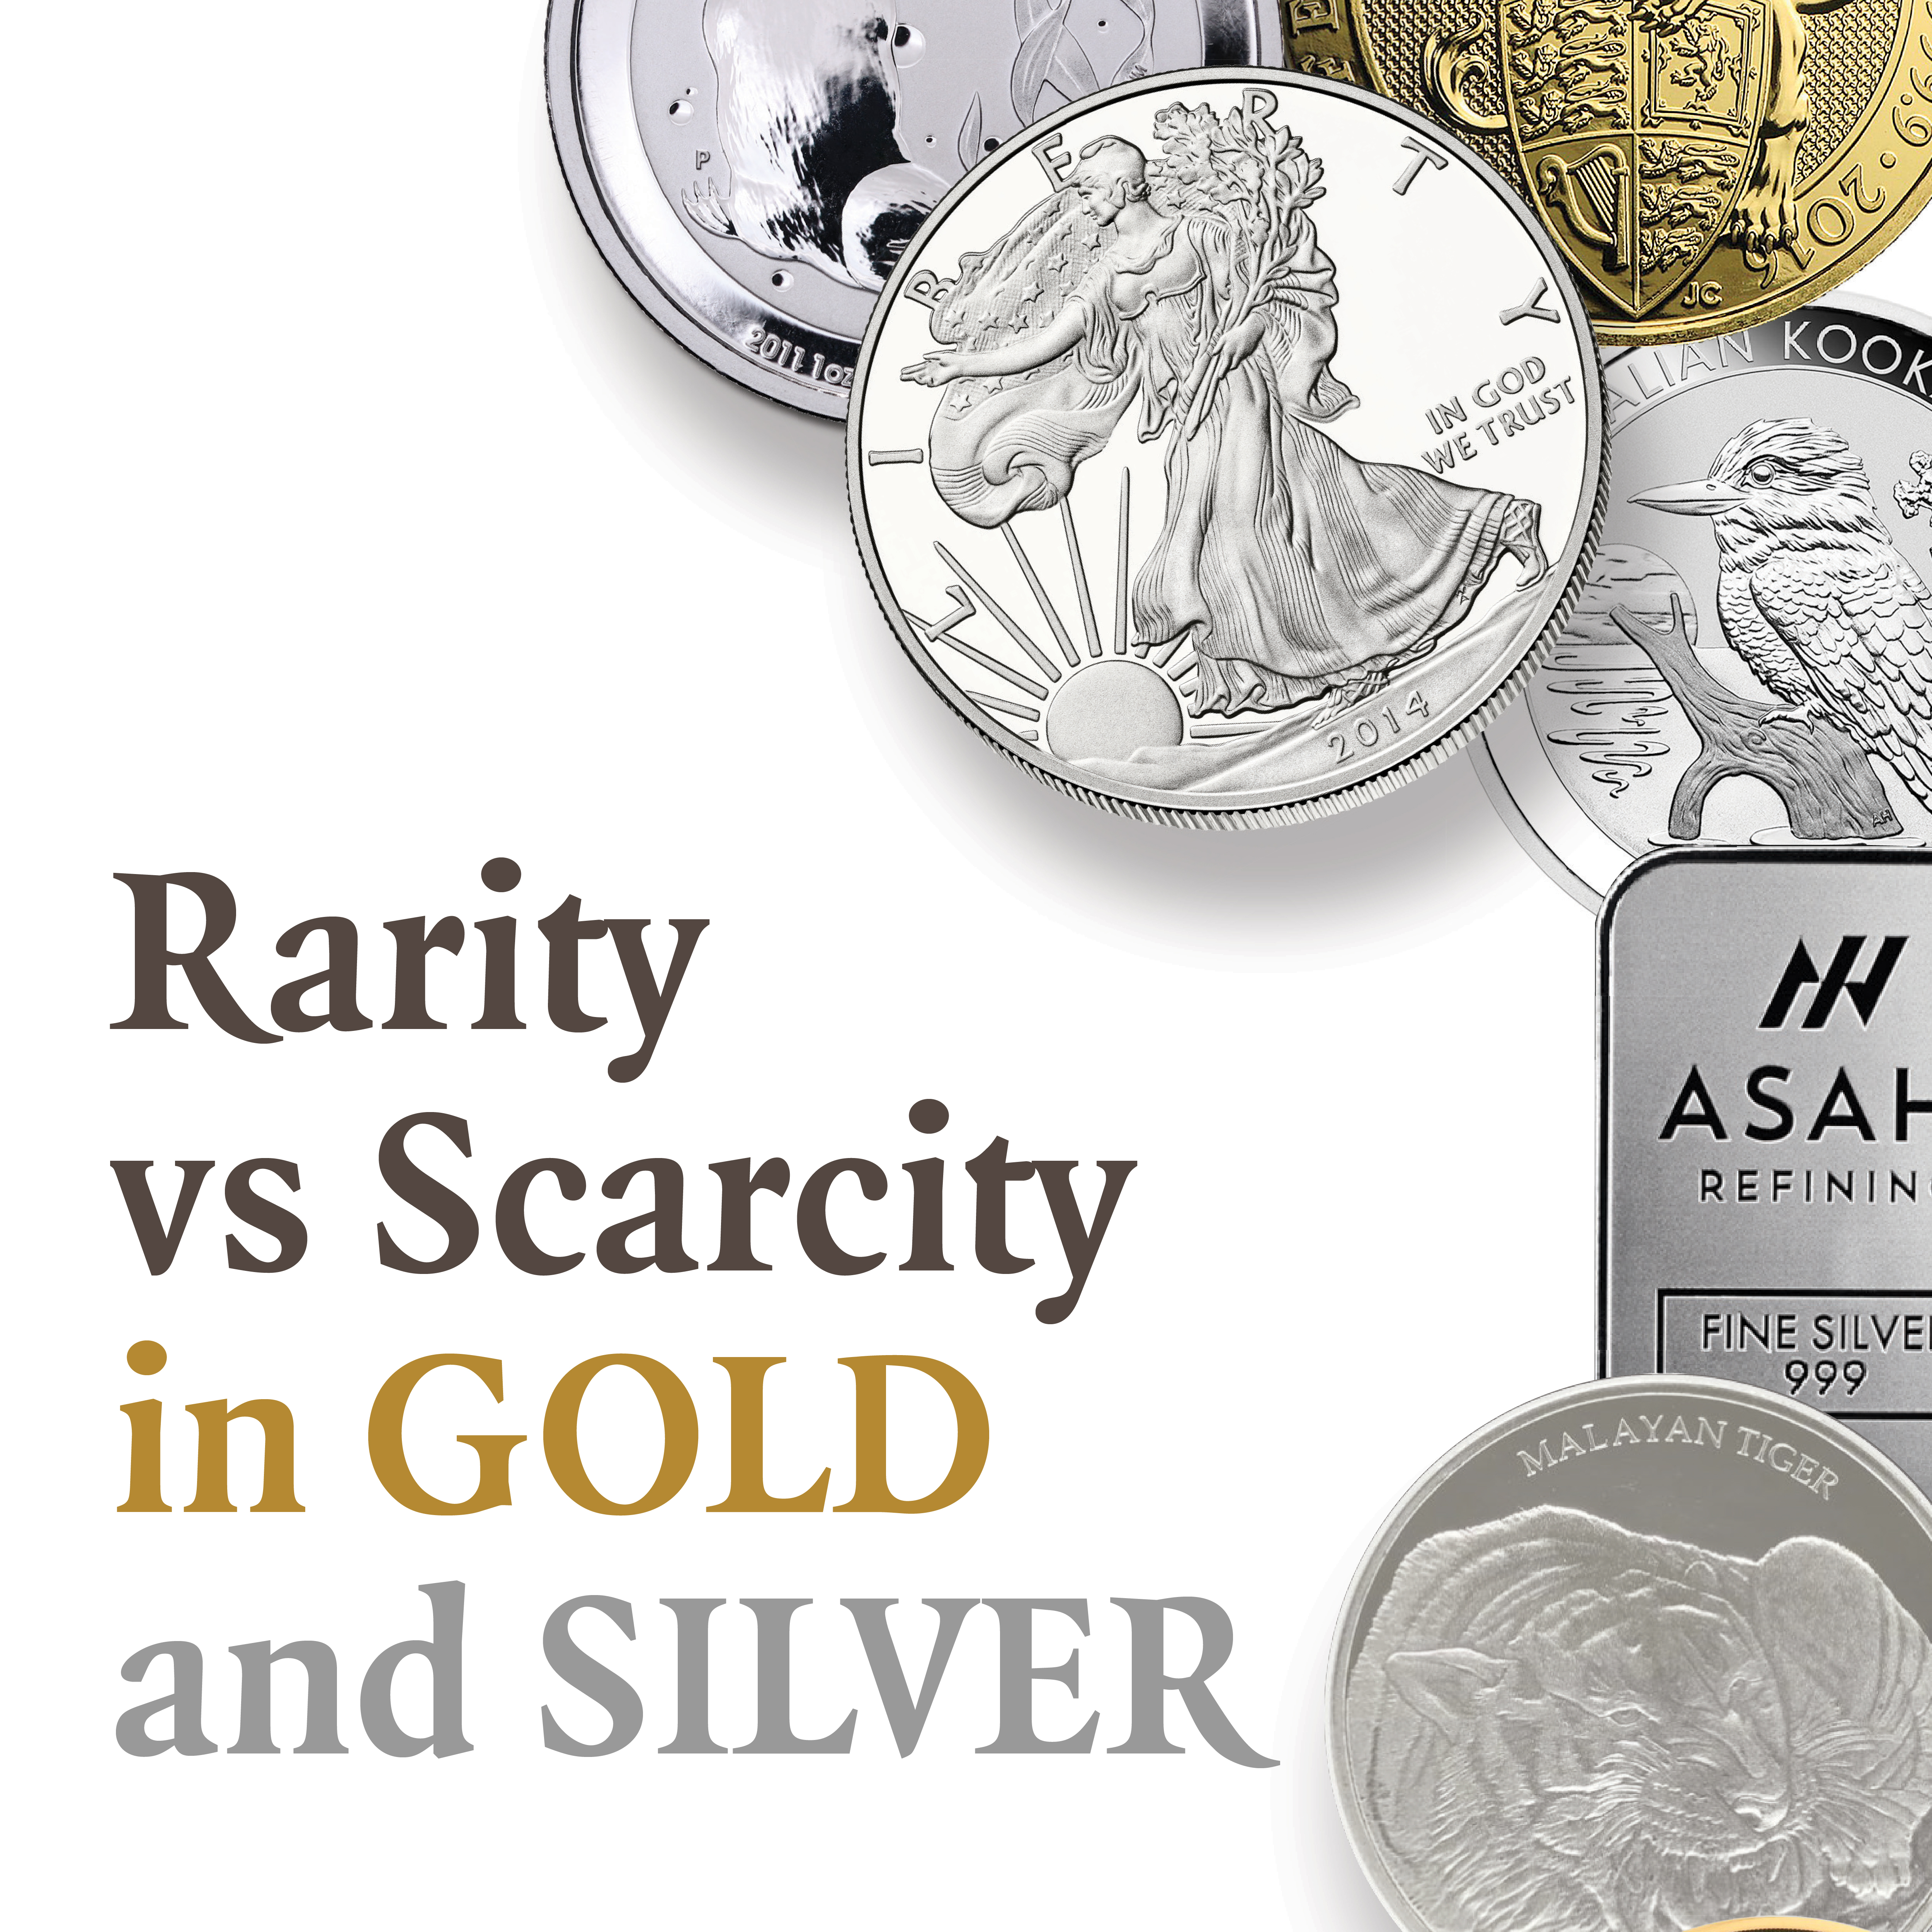 Rarity Vs Scarcity in Gold and Silver